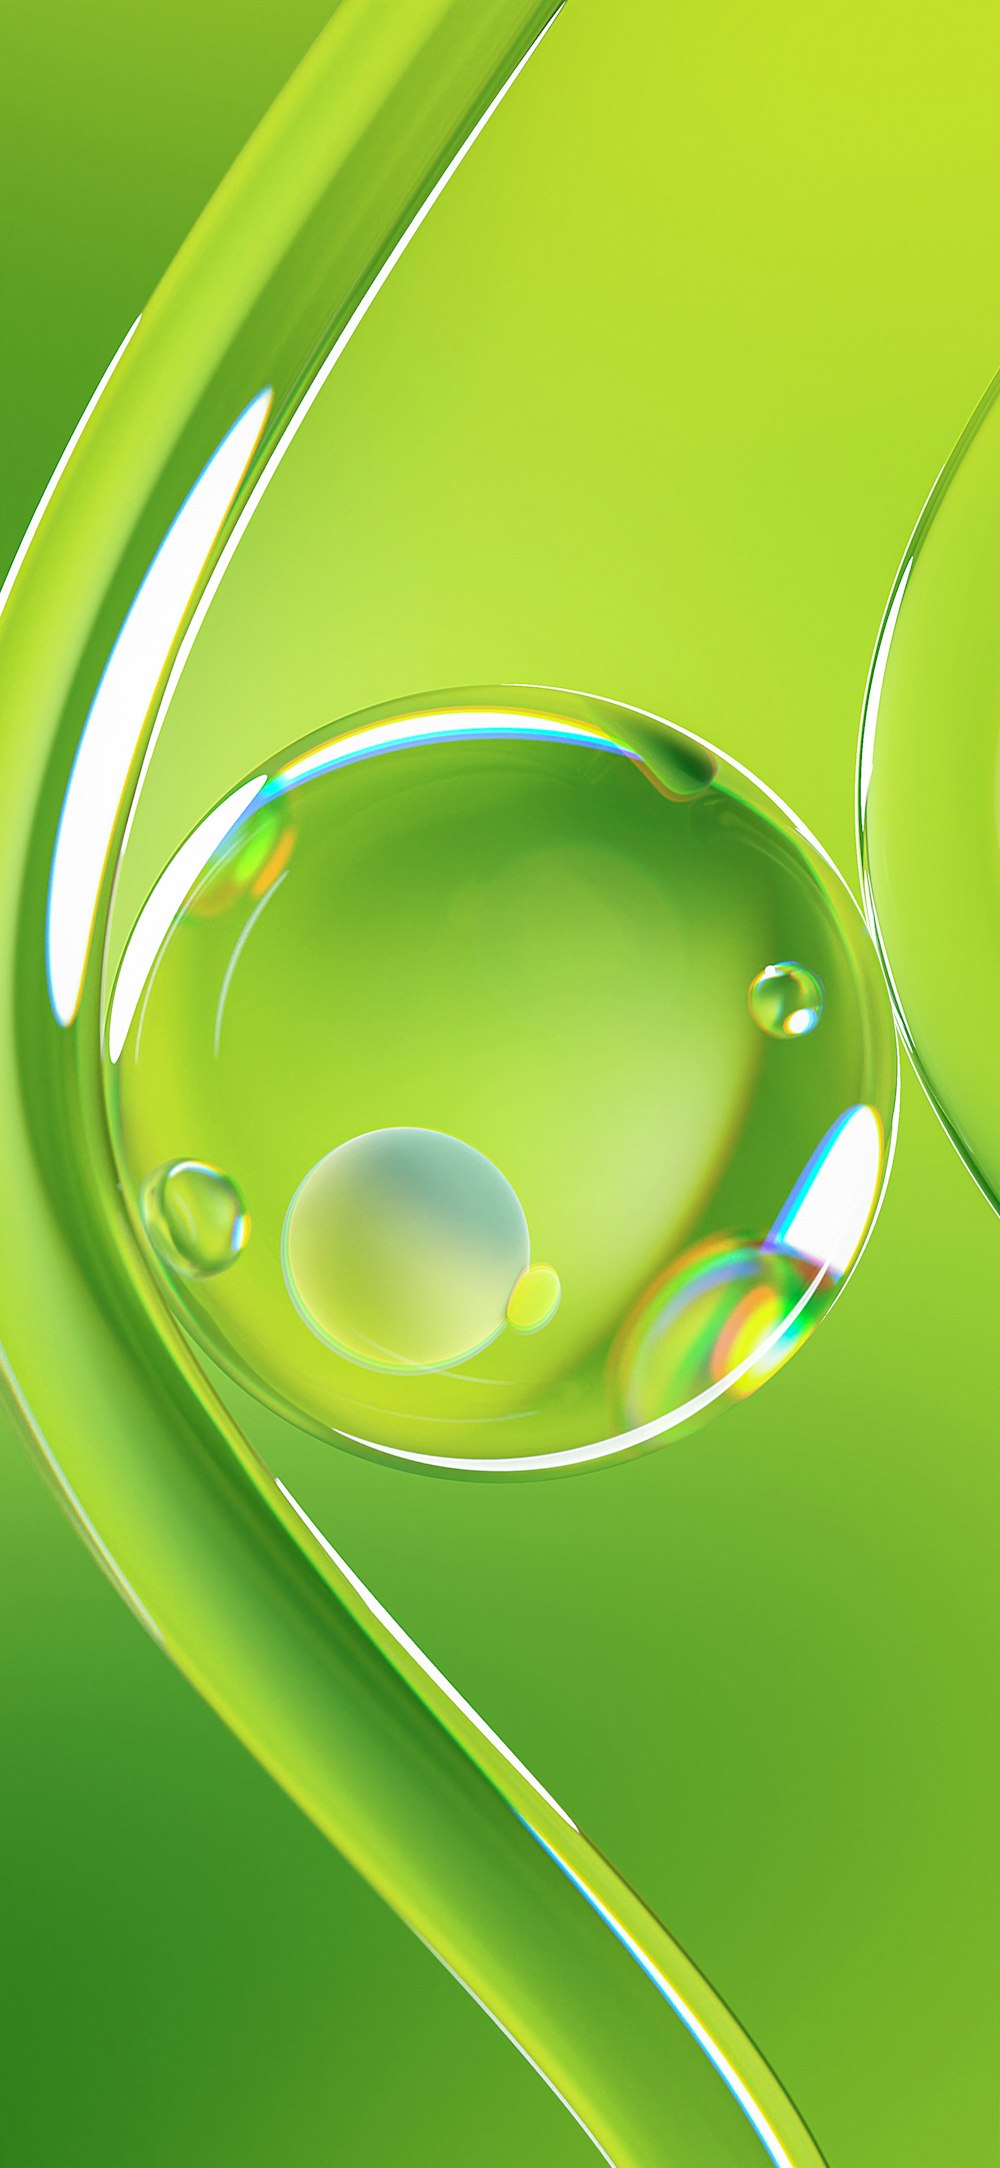 a close up of a drop of water on a green surface